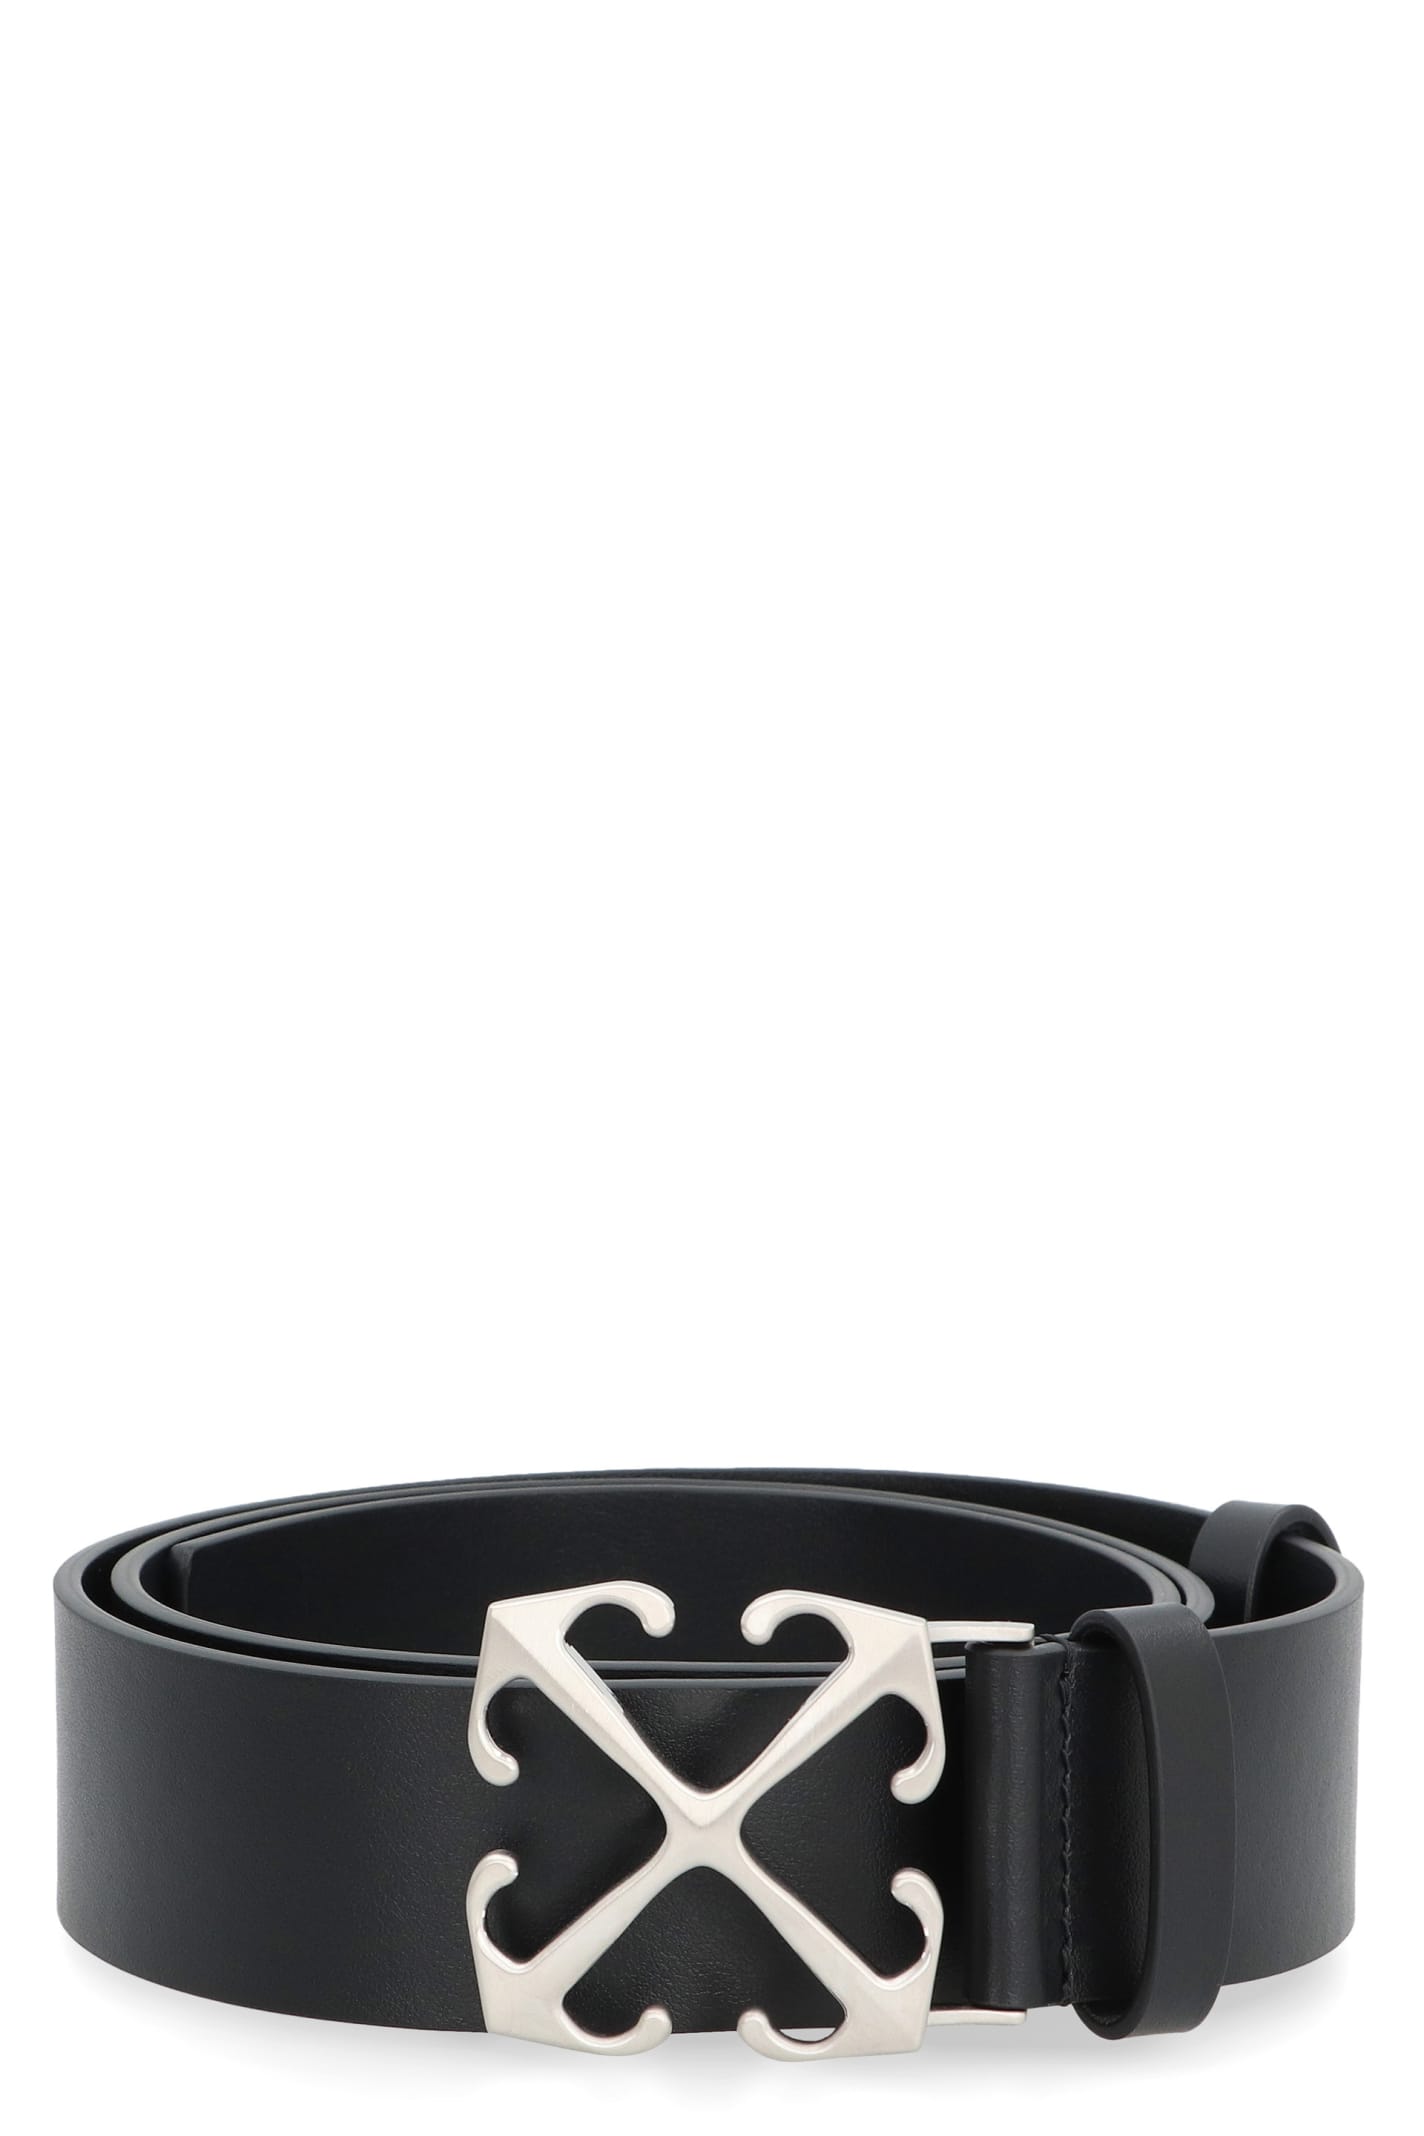 OFF-WHITE H35 LEATHER BELT